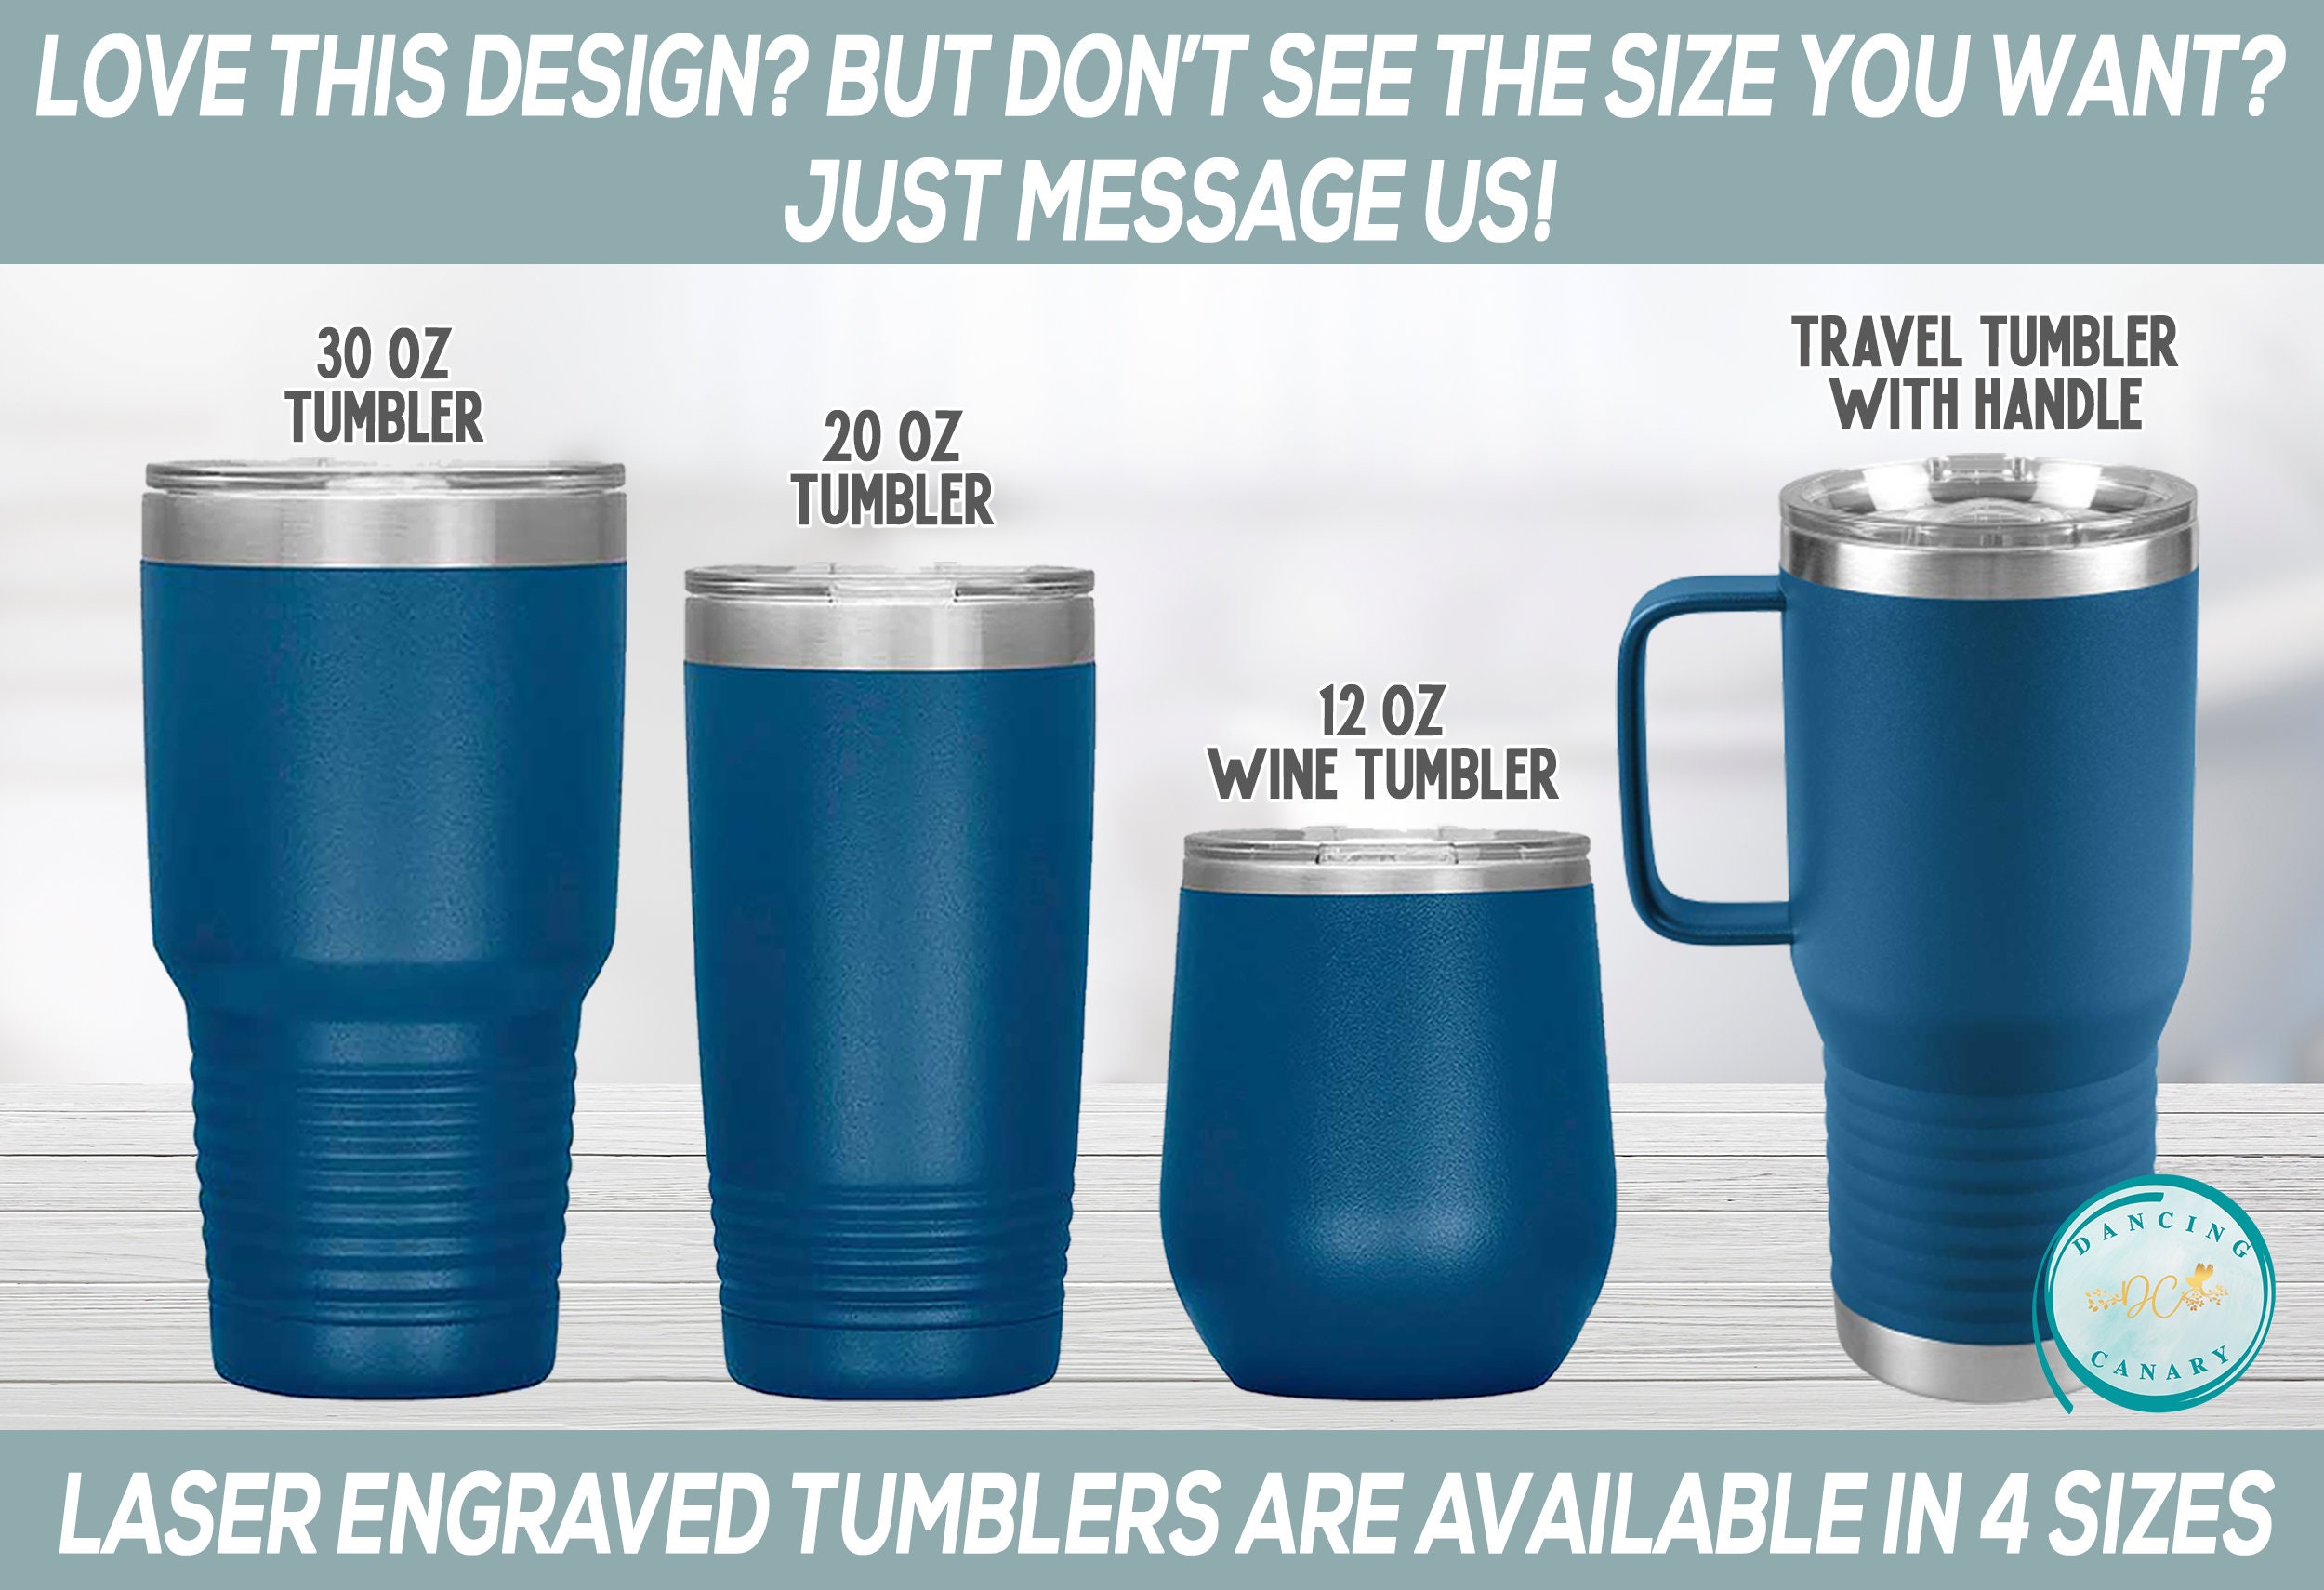 Boilermaker Tumbler, Boilermaker Gifts, Employee Gifts From Boss, Gifts for  Male Coworkers Under 30 Dollars, Work Related Gifts Under 25 